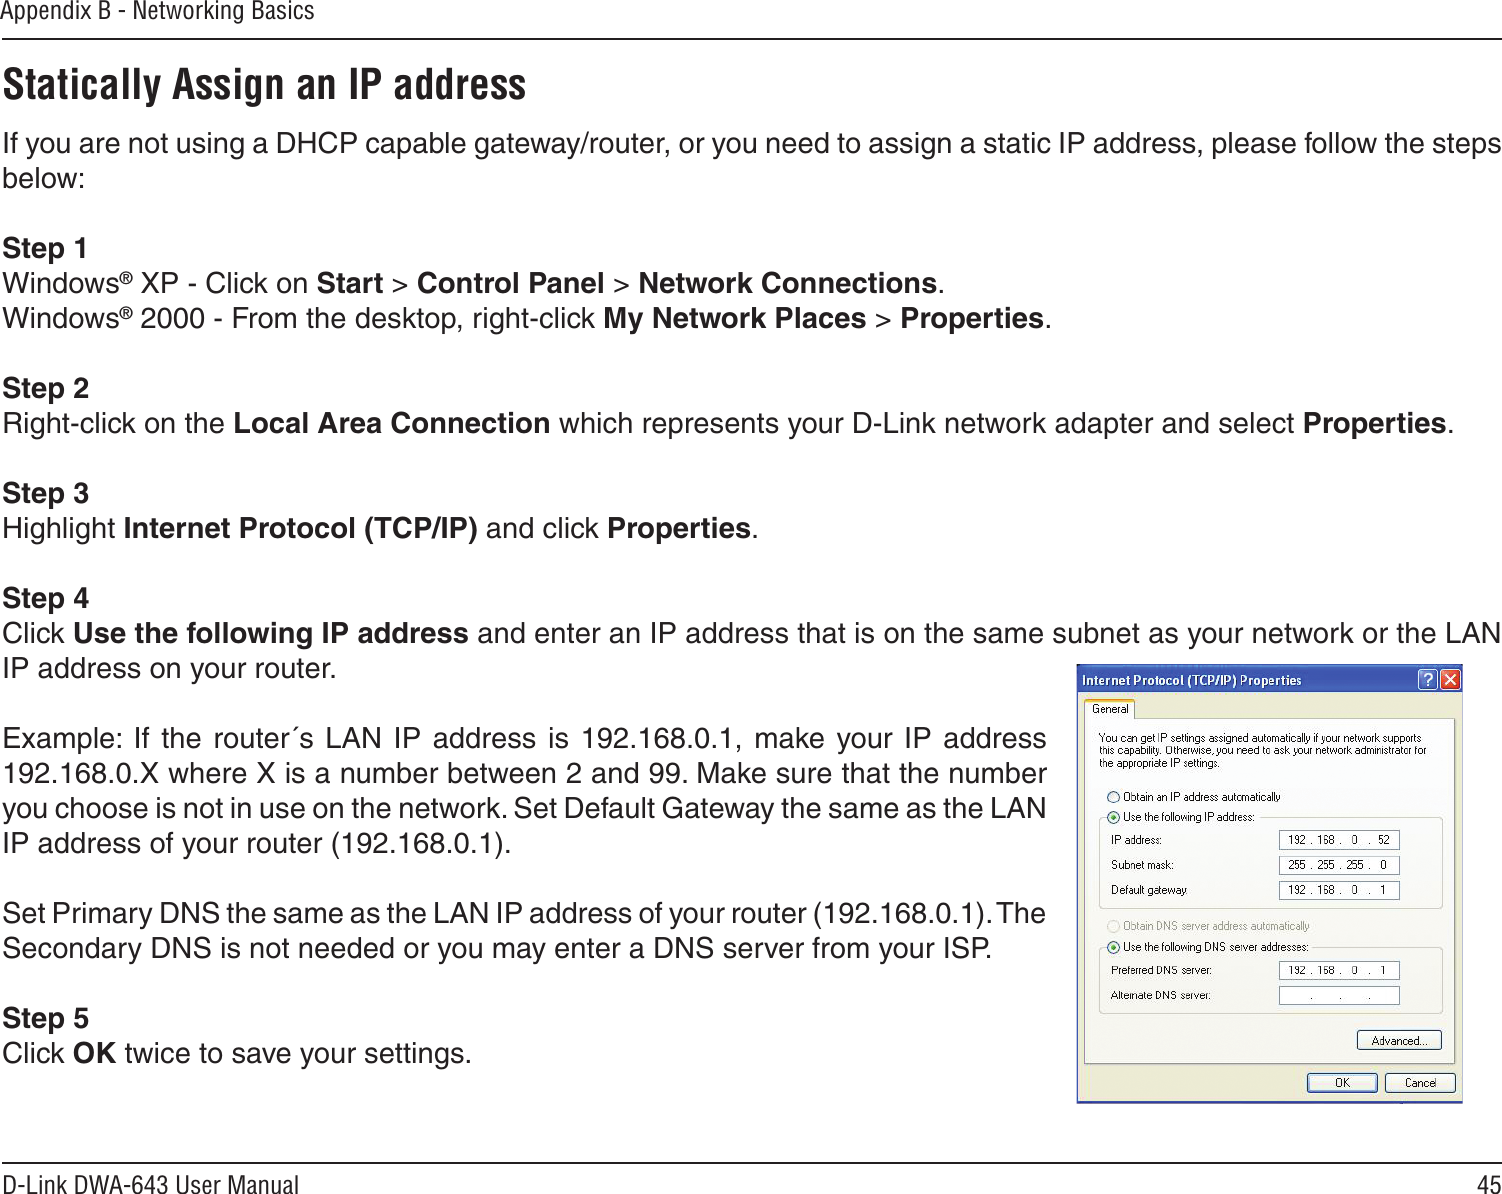 45D-Link DWA-643 User ManualAppendix B - Networking BasicsStatically Assign an IP addressIf you are not using a DHCP capable gateway/router, or you need to assign a static IP address, please follow the steps below:Step 1Windows® XP - Click on Start &gt; Control Panel &gt; Network Connections.Windows® 2000 - From the desktop, right-click My Network Places &gt; Properties.Step 2Right-click on the Local Area Connection which represents your D-Link network adapter and select Properties.Step 3Highlight Internet Protocol (TCP/IP) and click Properties.Step 4Click Use the following IP address and enter an IP address that is on the same subnet as your network or the LAN IP address on your router. Example:  If  the  router´s LAN IP address is  192.168.0.1,  make your  IP  address 192.168.0.X where X is a number between 2 and 99. Make sure that the number you choose is not in use on the network. Set Default Gateway the same as the LAN IP address of your router (192.168.0.1). Set Primary DNS the same as the LAN IP address of your router (192.168.0.1). The Secondary DNS is not needed or you may enter a DNS server from your ISP.Step 5Click OK twice to save your settings.